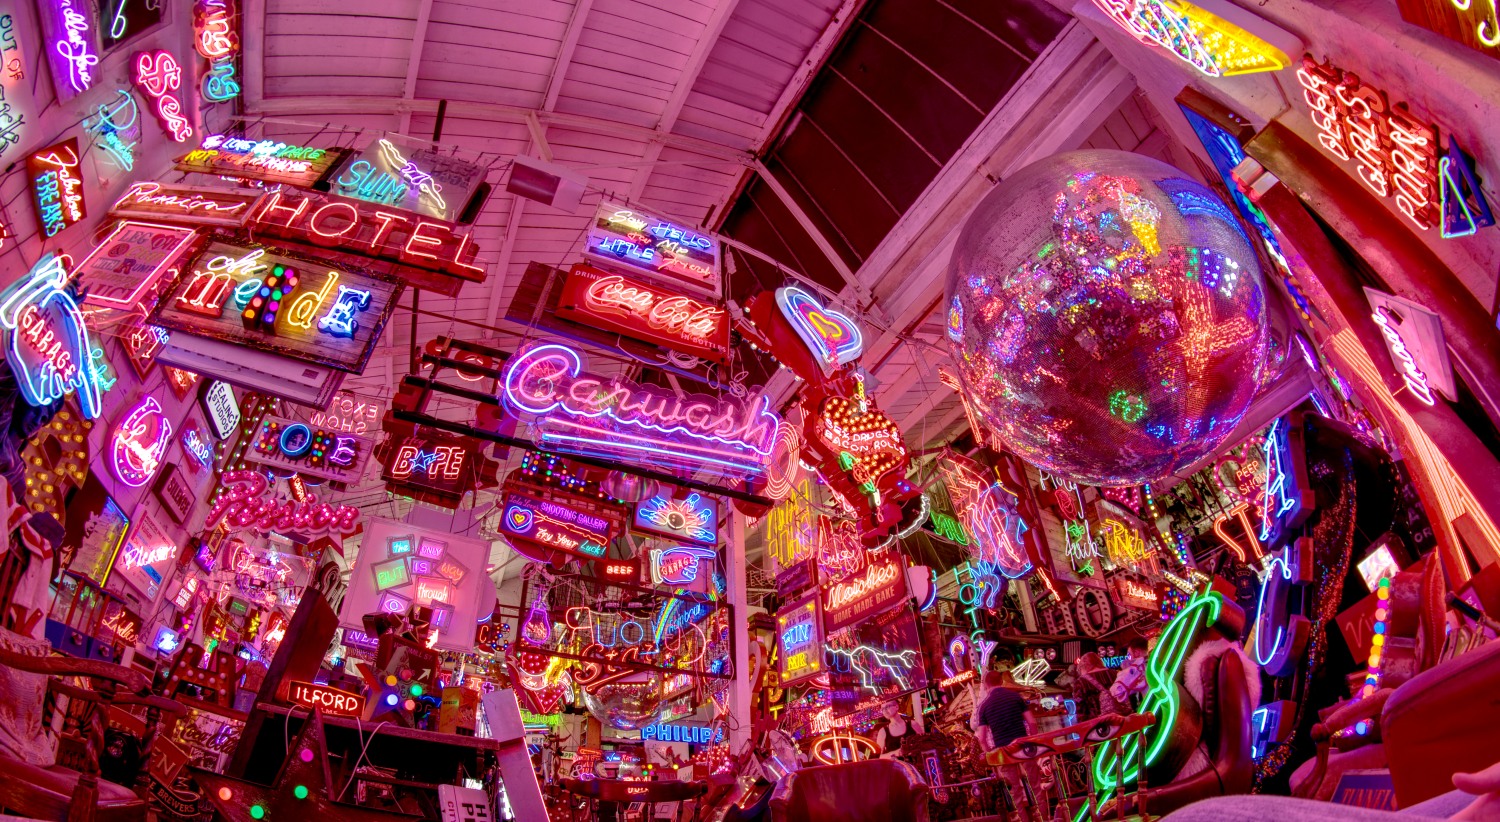 God's own junkyard: electric neon signs as far as the eye can see 